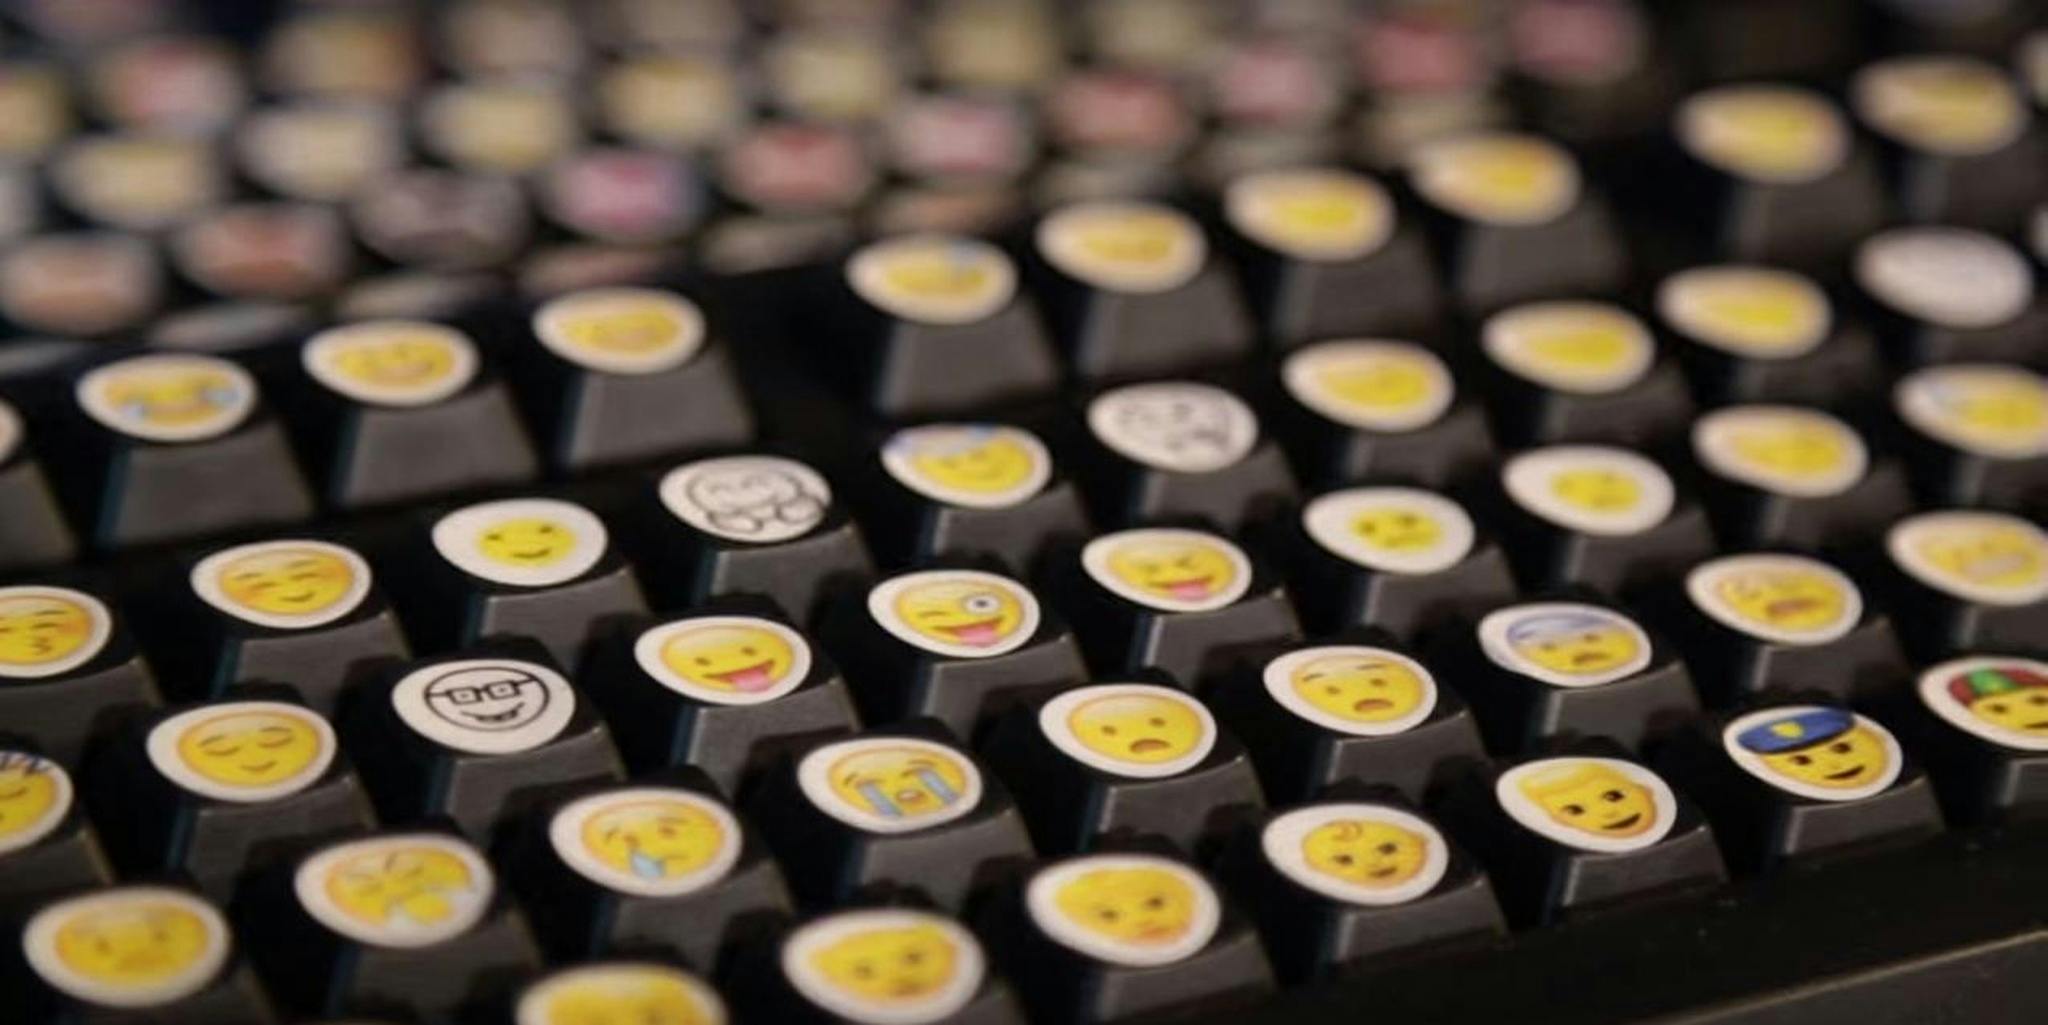 This keyboard has over 1,000 keys and they're all emojis - The Daily Dot